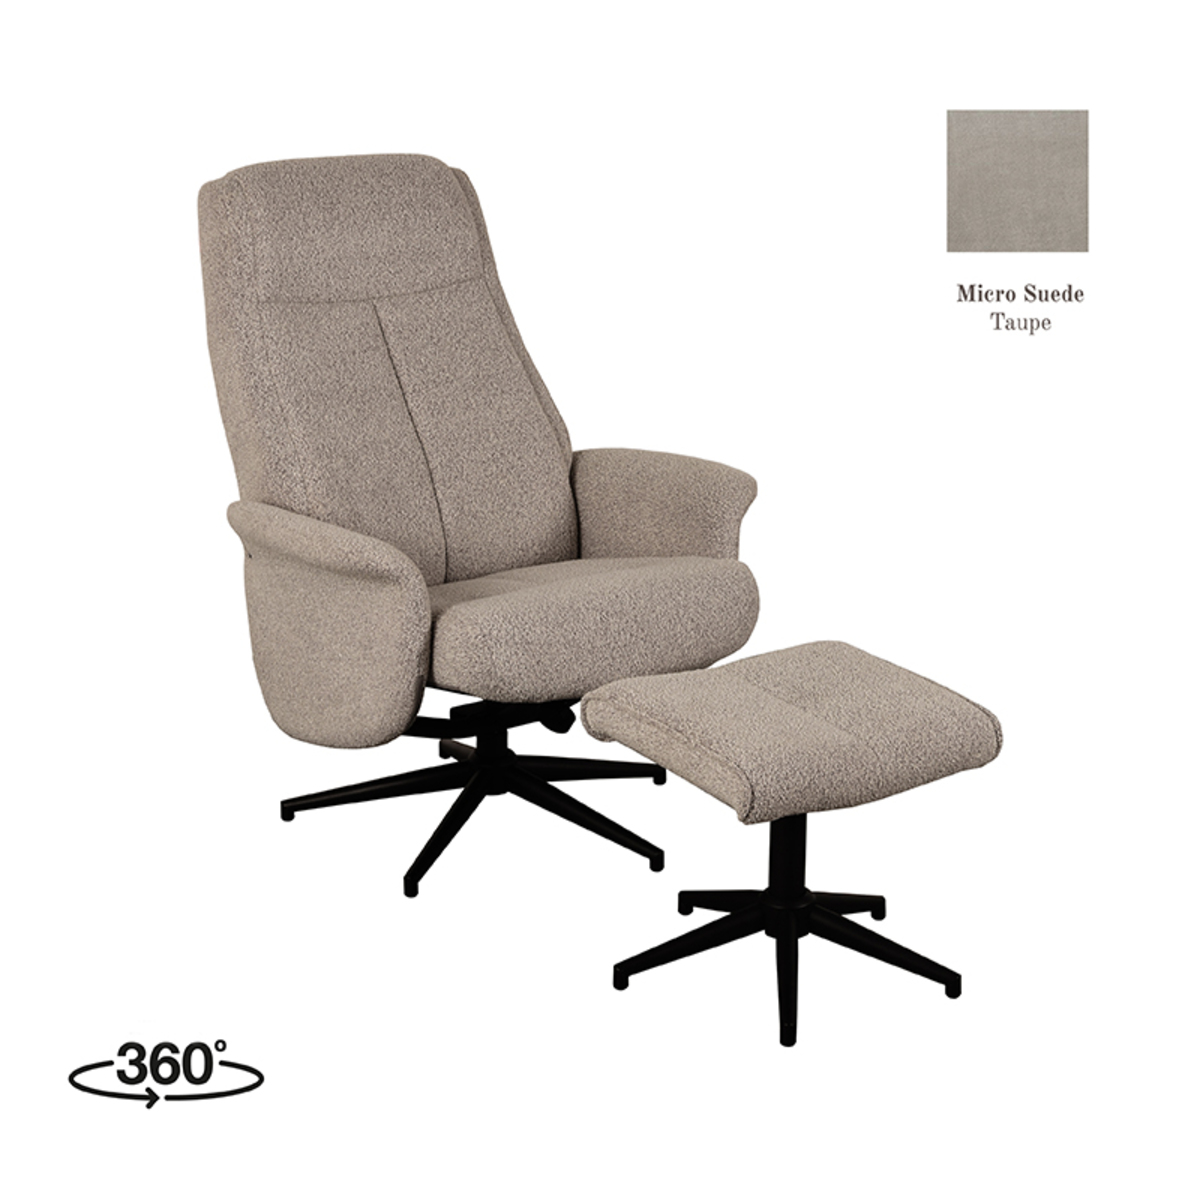 LABEL51 Fauteuil Bergen - Taupe - Micro Suede - Incl. Ottoman Taupe Fauteuil